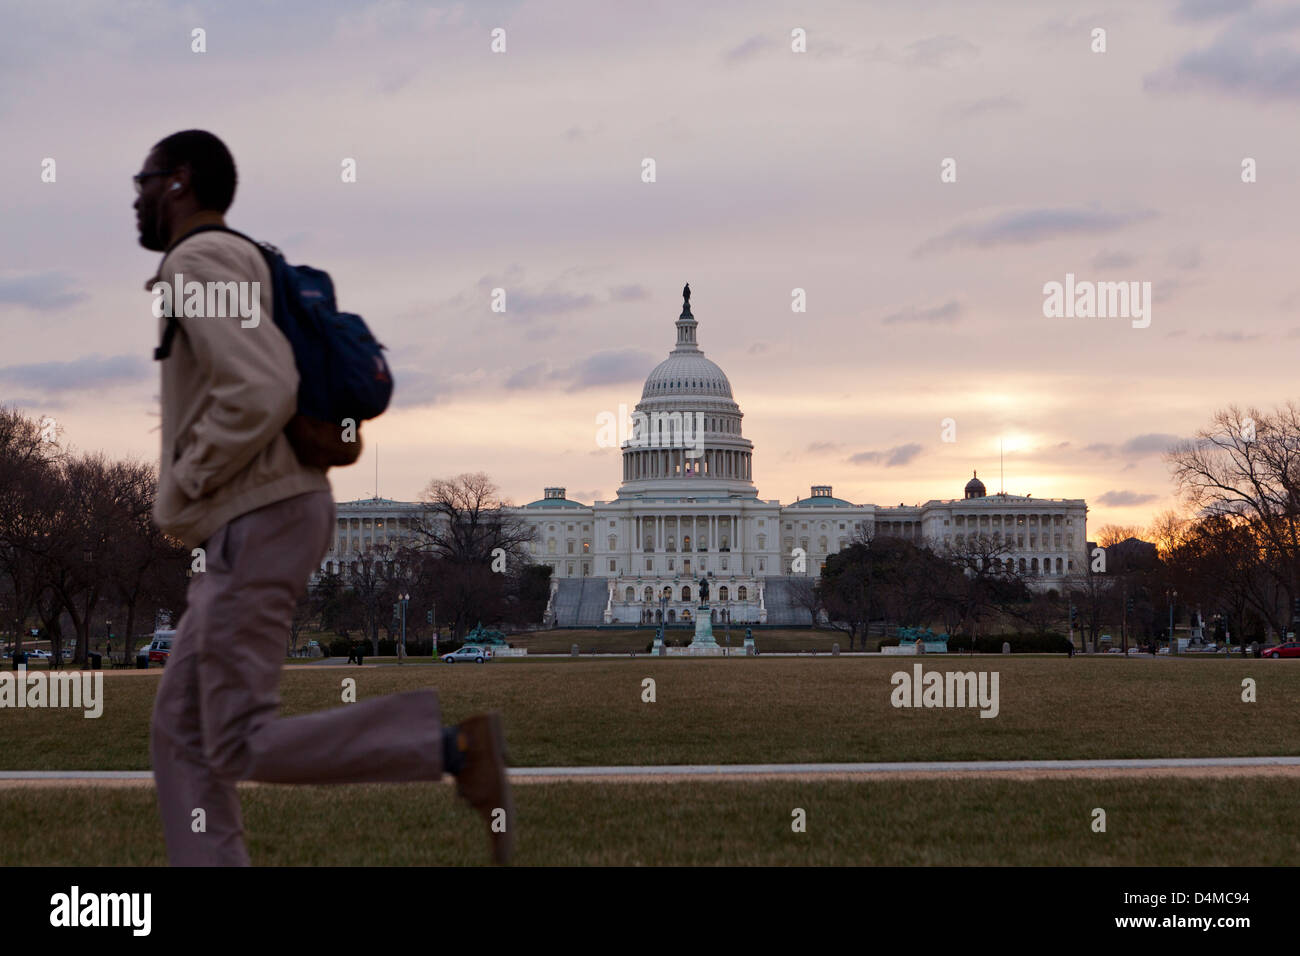 Early morning commuter at the US Capitol - Washington, DC USA Stock Photo